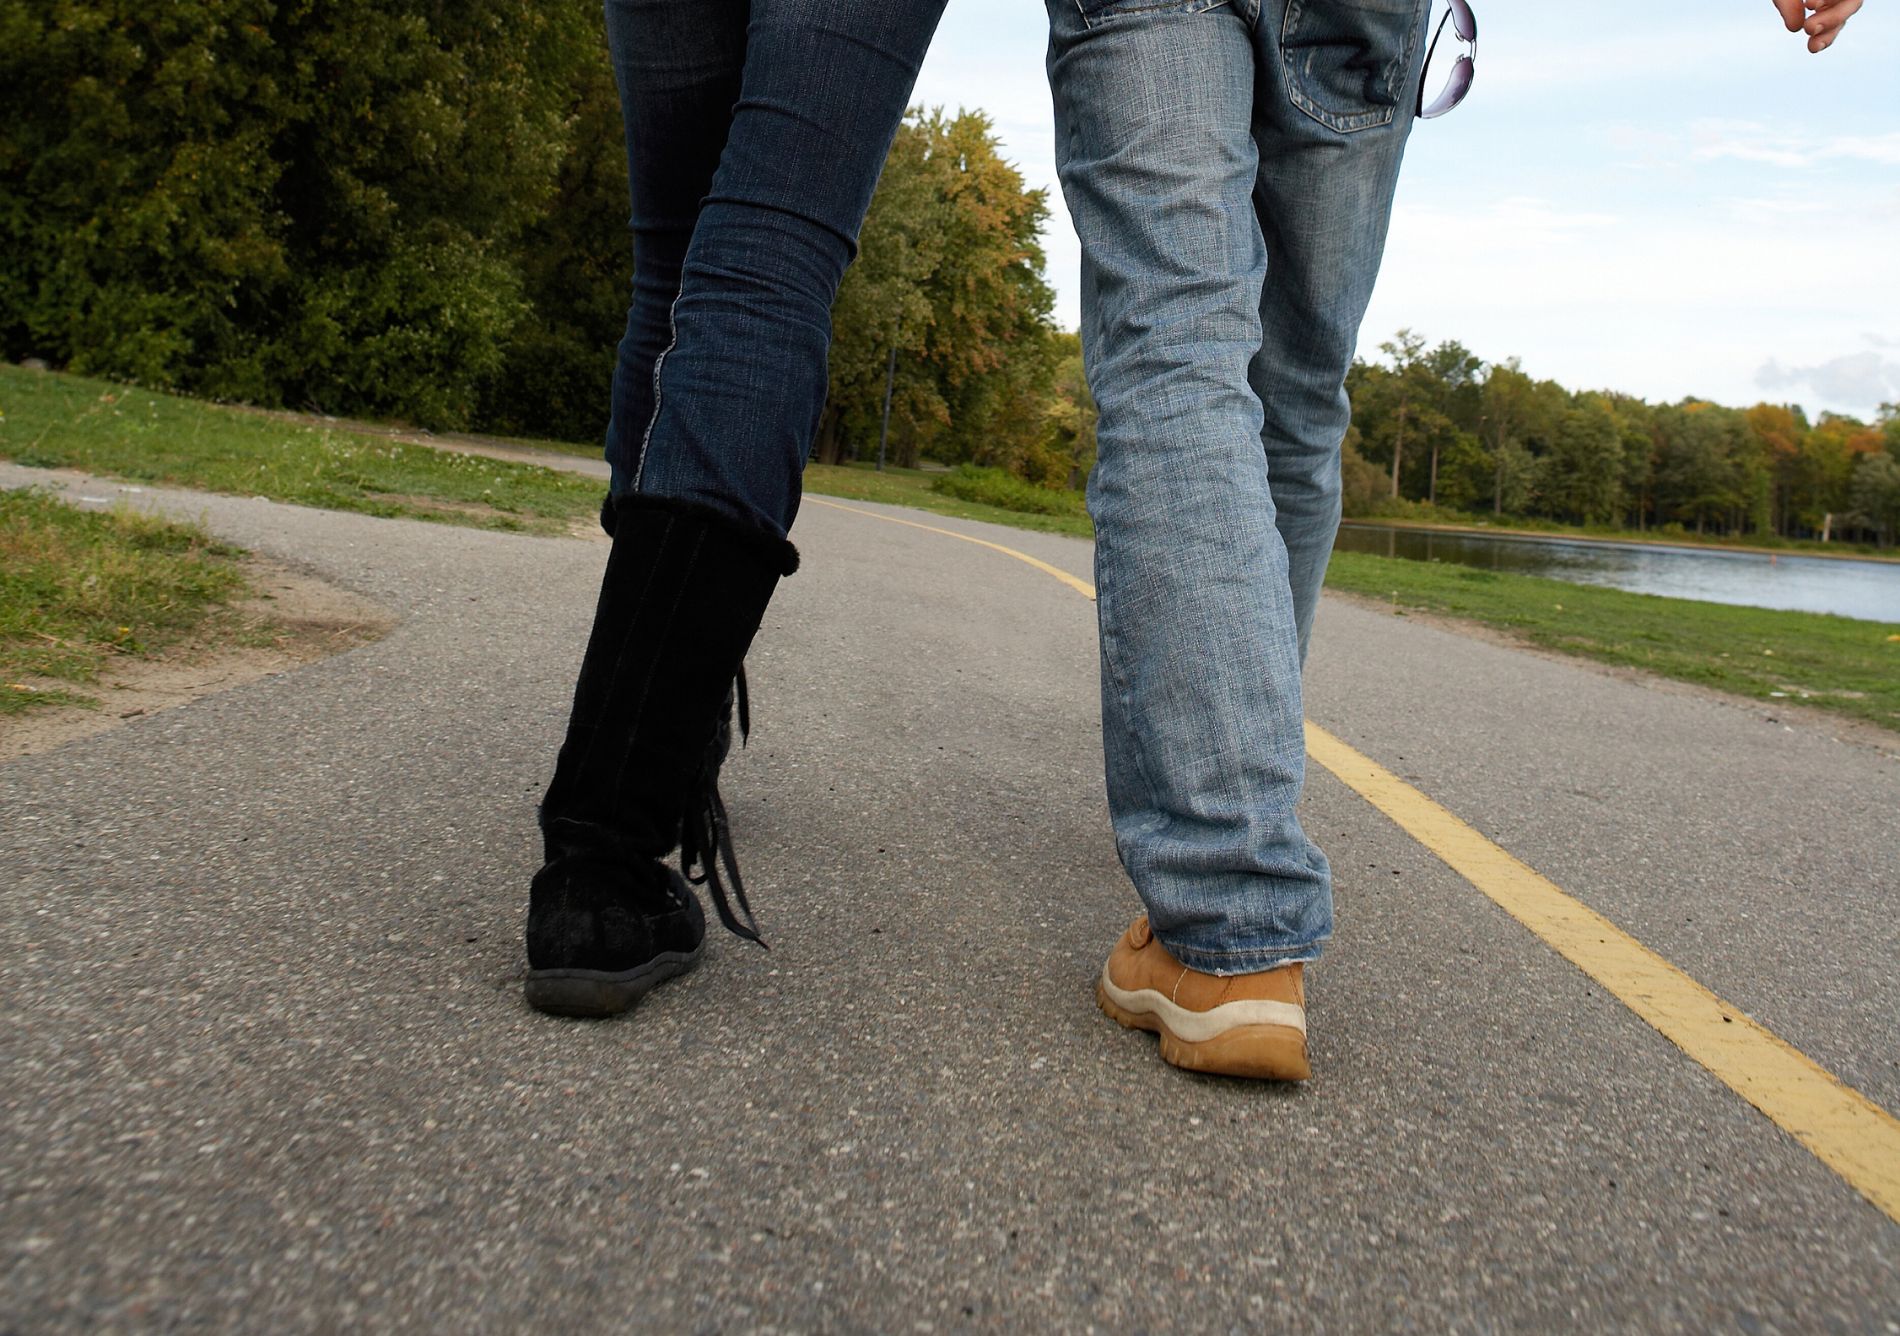 A couple walking on a paved path with water and trees in the background